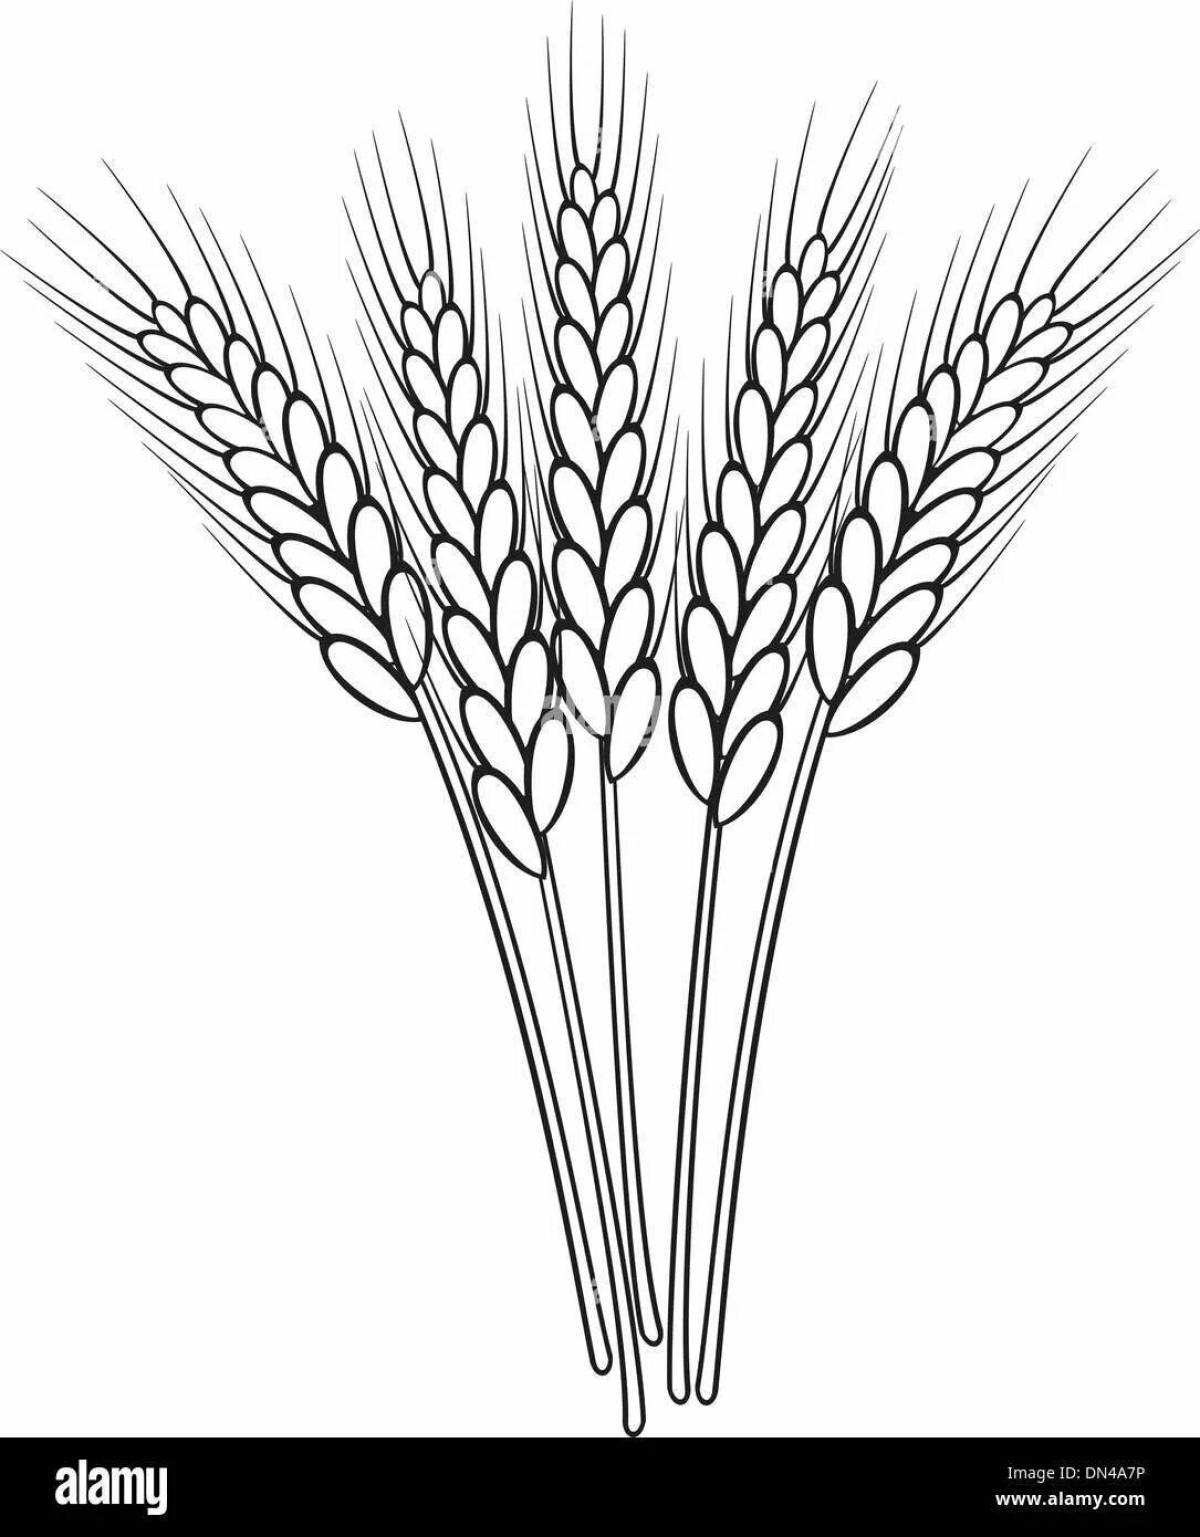 Great grain coloring page for kids